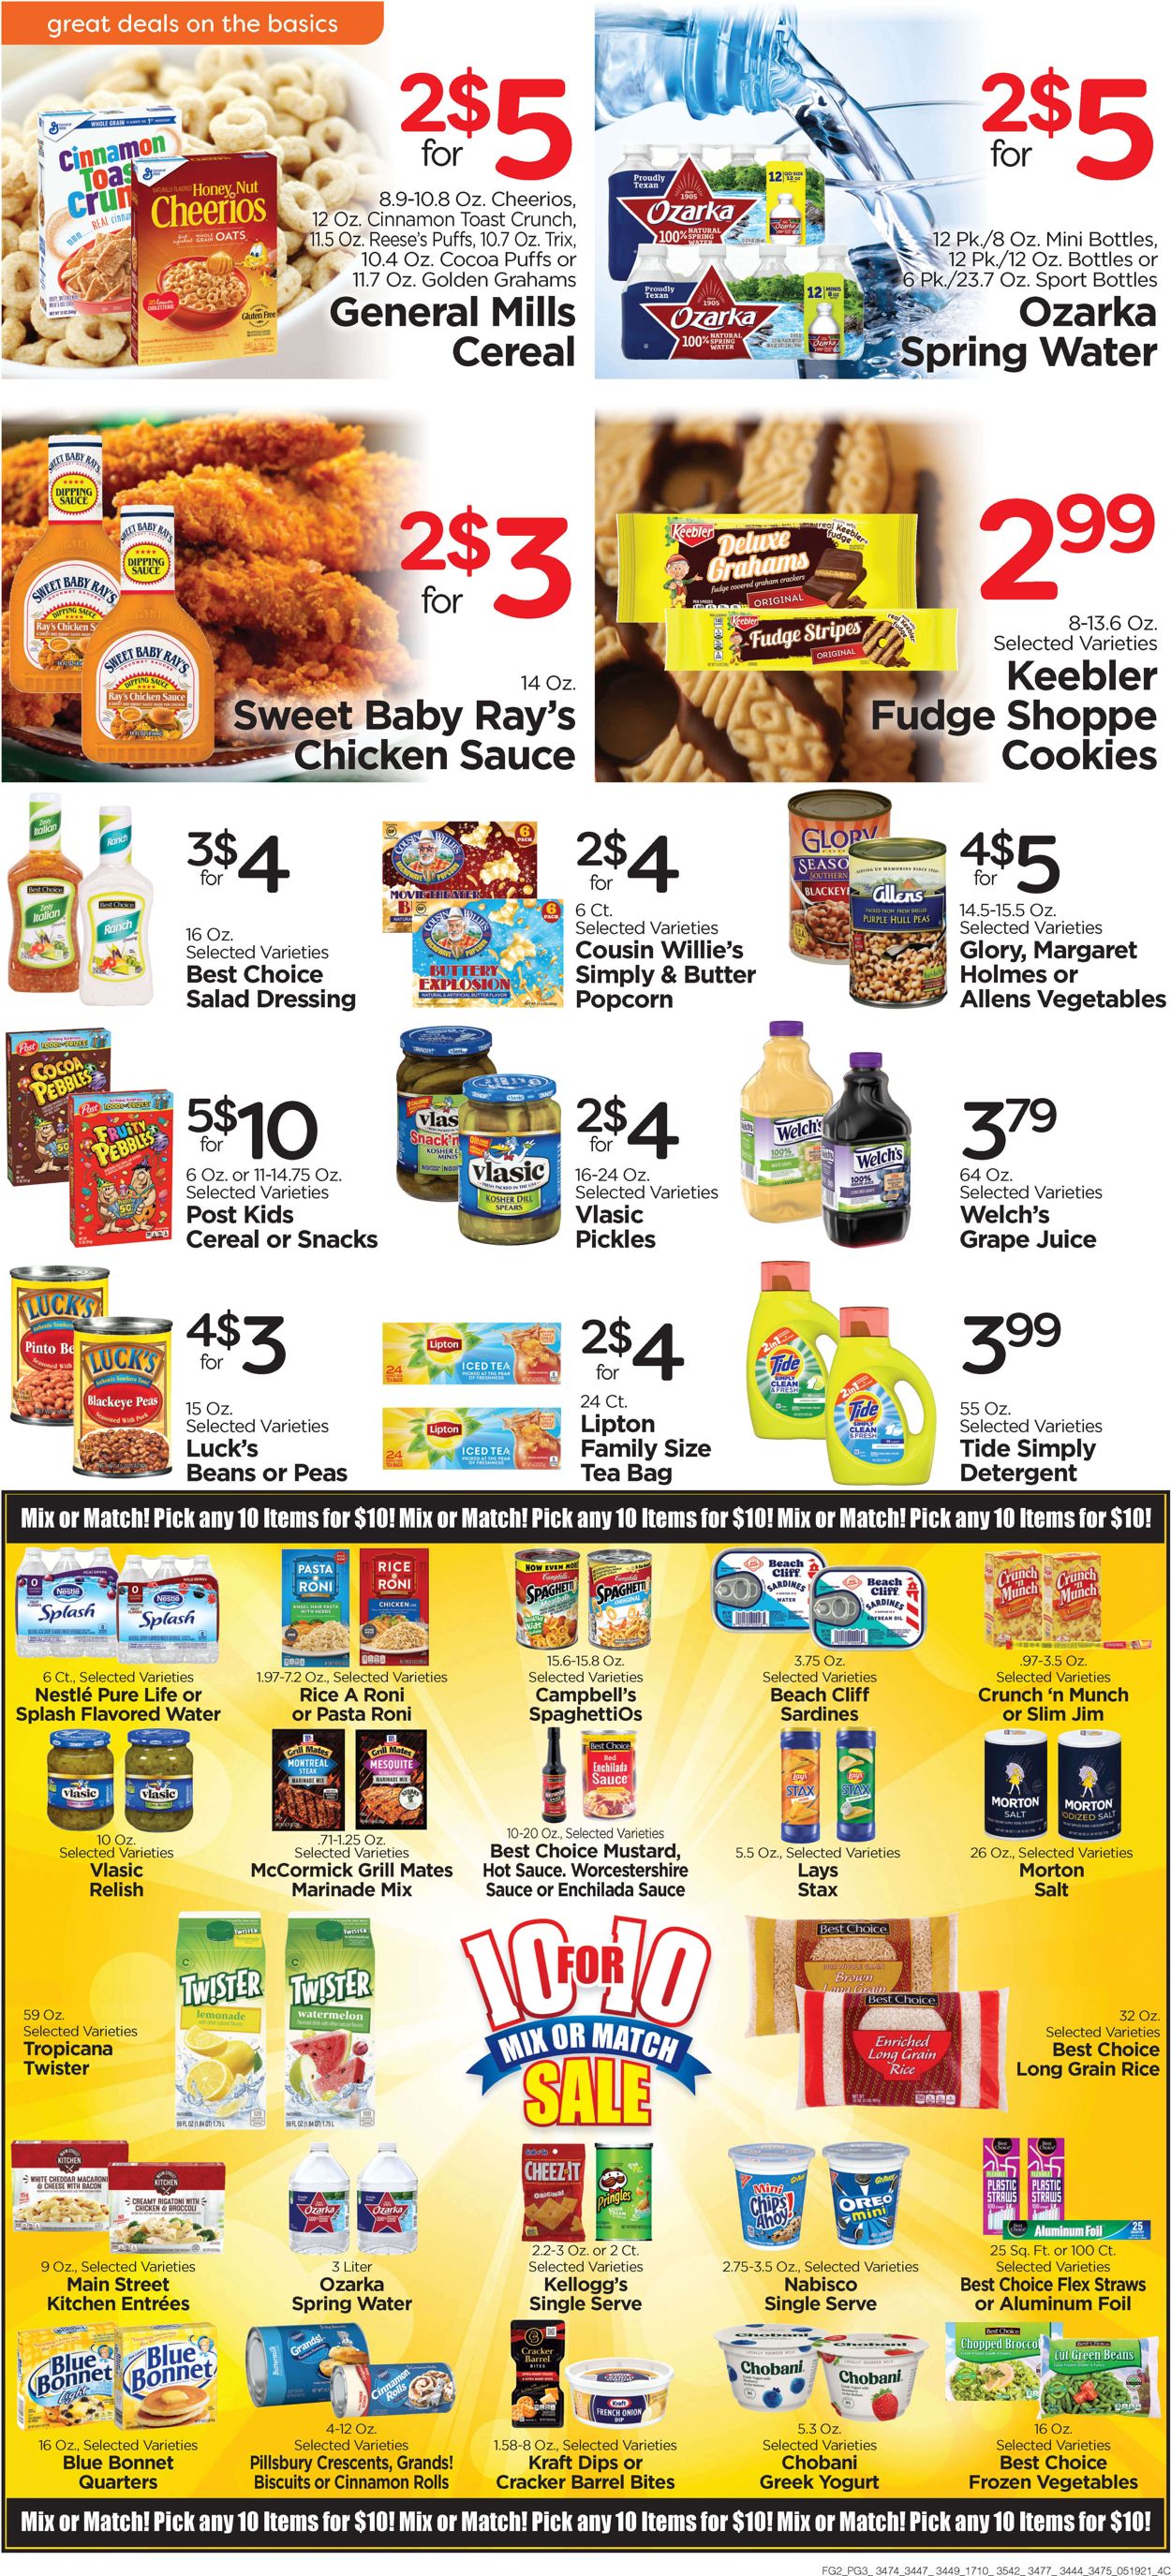 Catalogue Edwards Food Giant from 05/19/2021